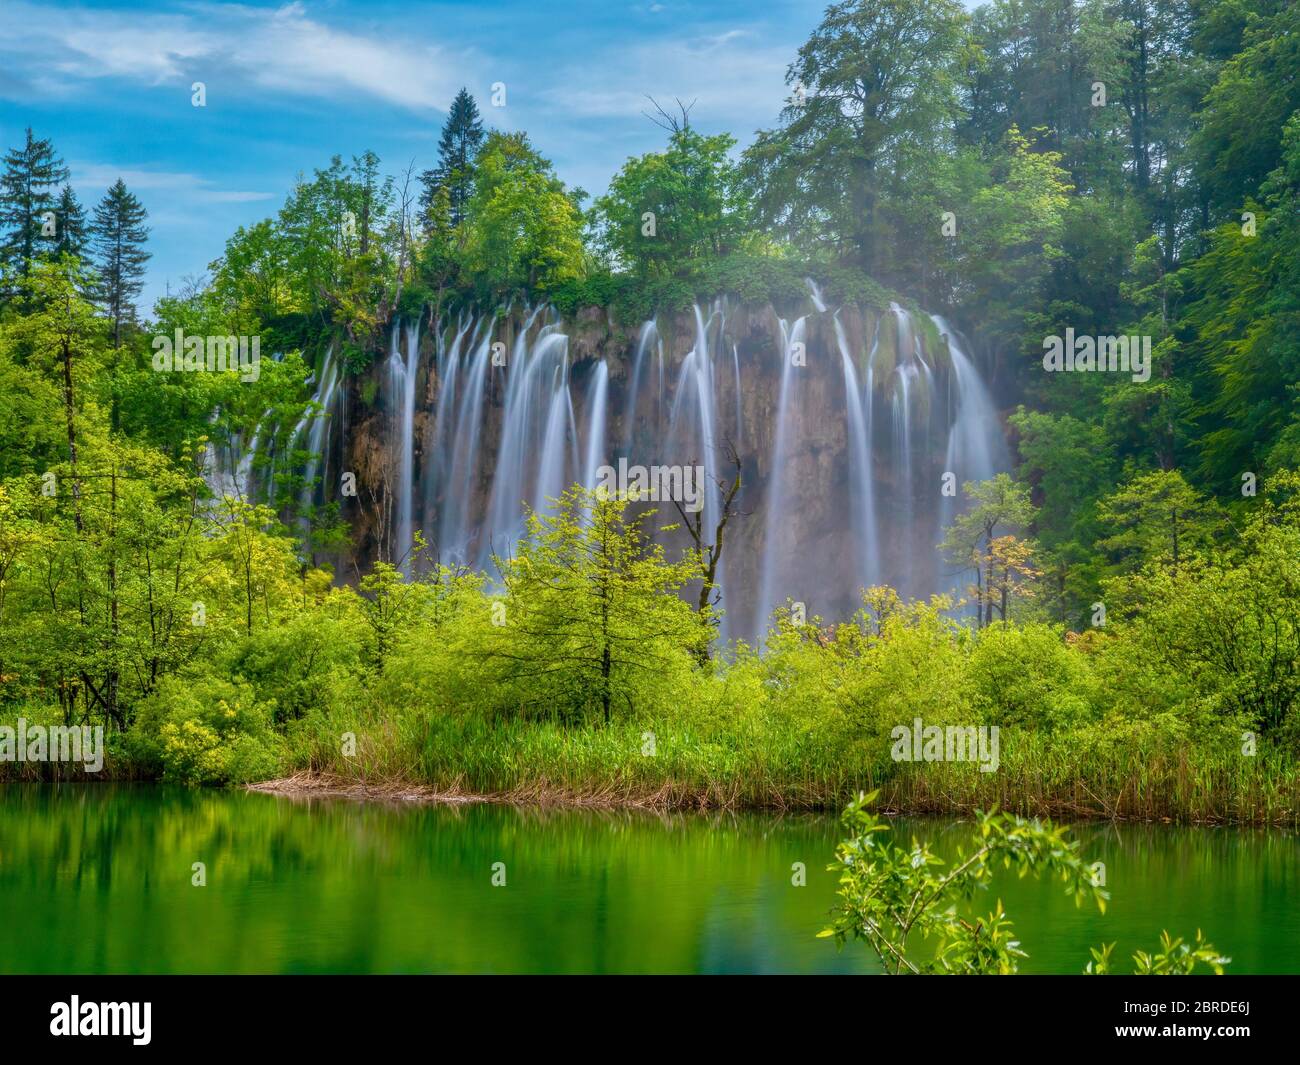 Long exposure of a beautiful set of waterfalls set in the vibrant green forest of Plitvice Lakes National Park, Croatia. Stock Photo